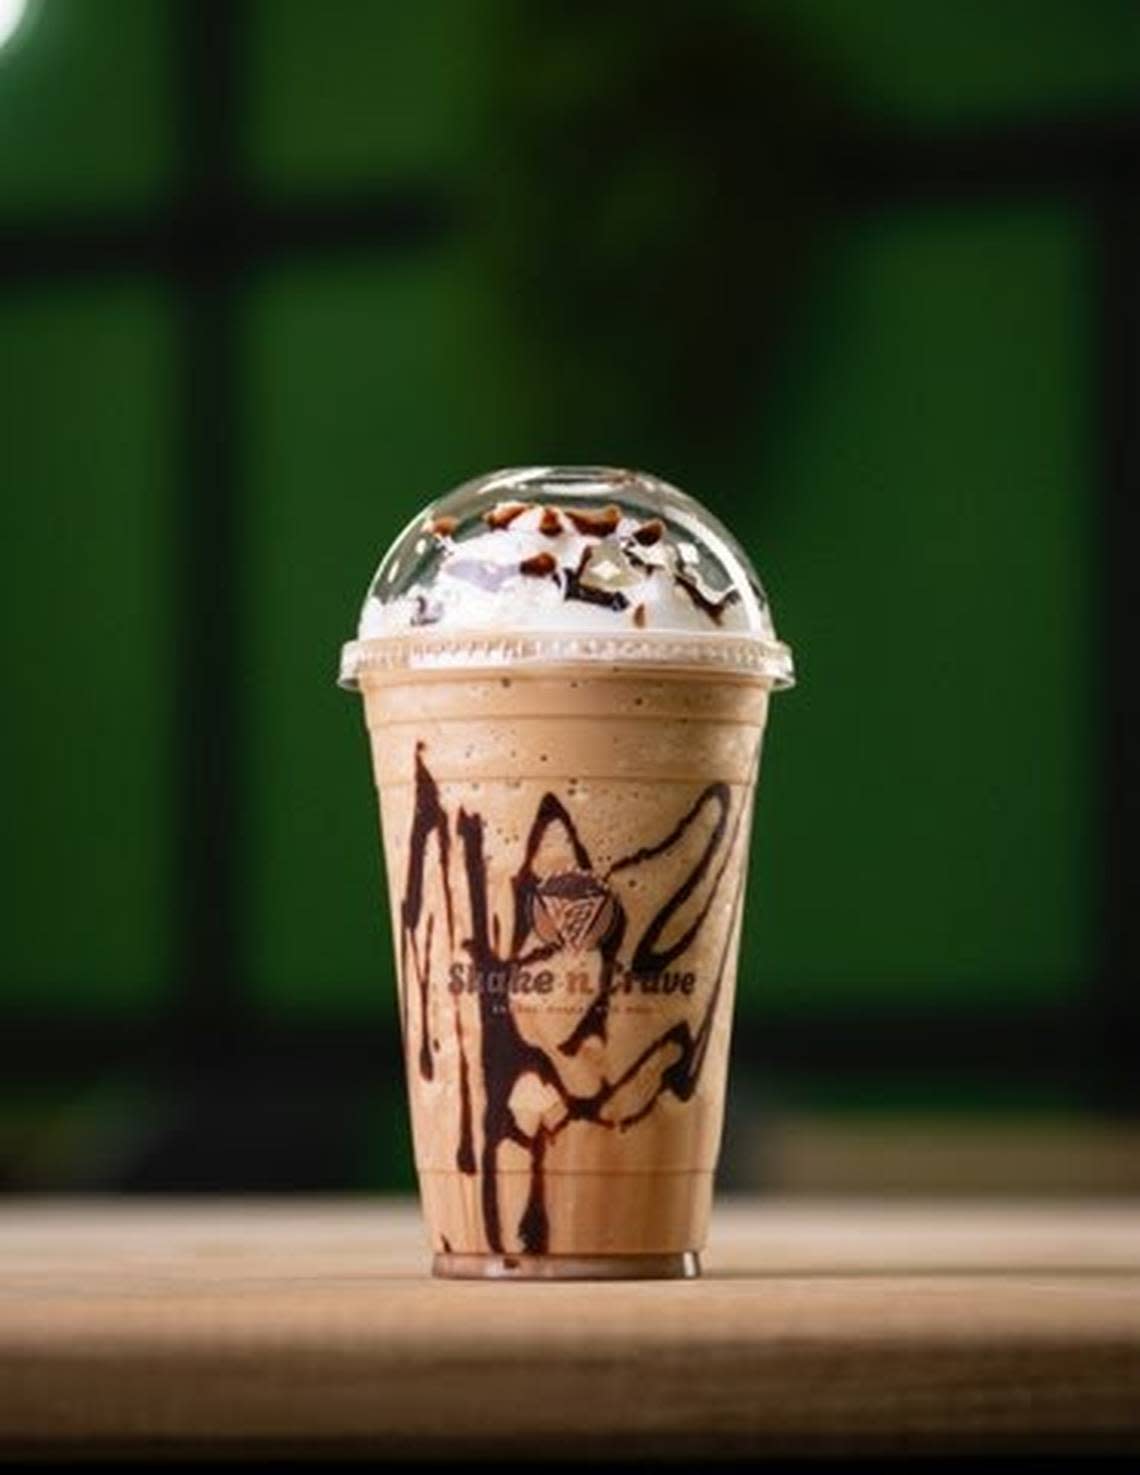 Besides crepes and waffles, Shake n Crave offers a variety of milkshakes.